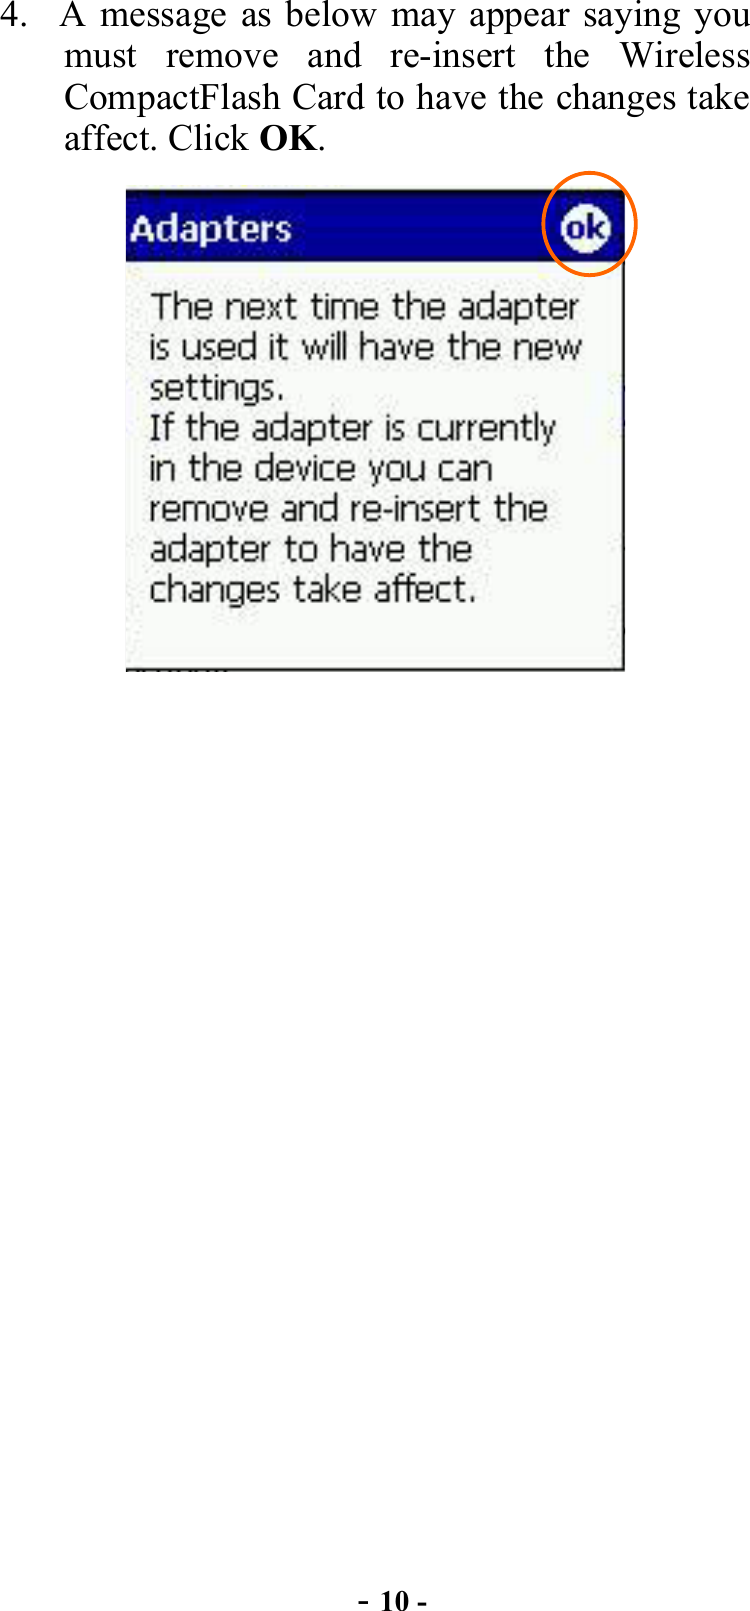  - 10 - 4.  A message as below may appear saying you must remove and re-insert the Wireless CompactFlash Card to have the changes take affect. Click OK.  